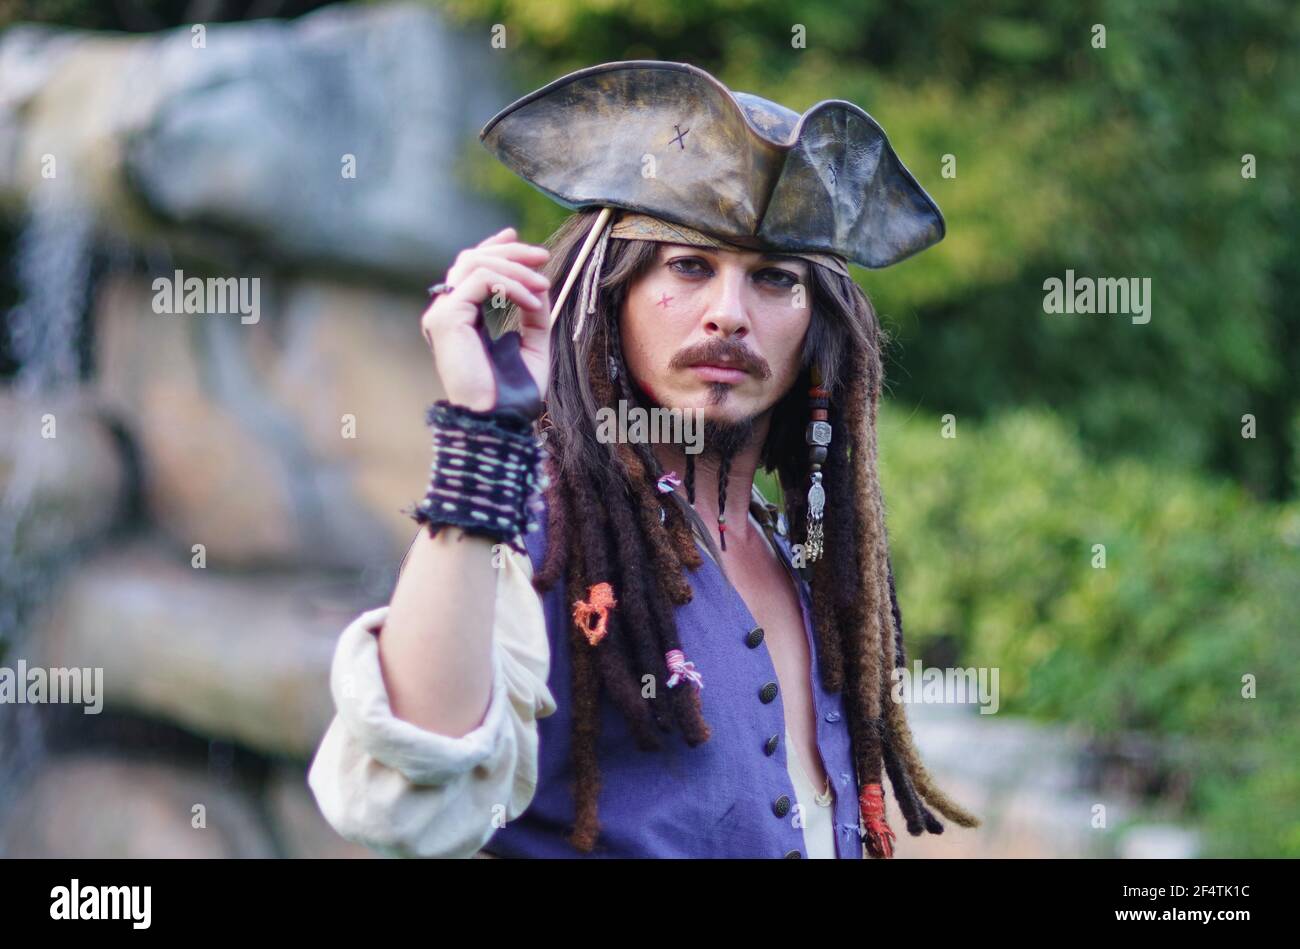 Actor posing for photographers in person cosplay 'Captain Jack Sparrow' from Pirates of the Caribbean Stock Photo